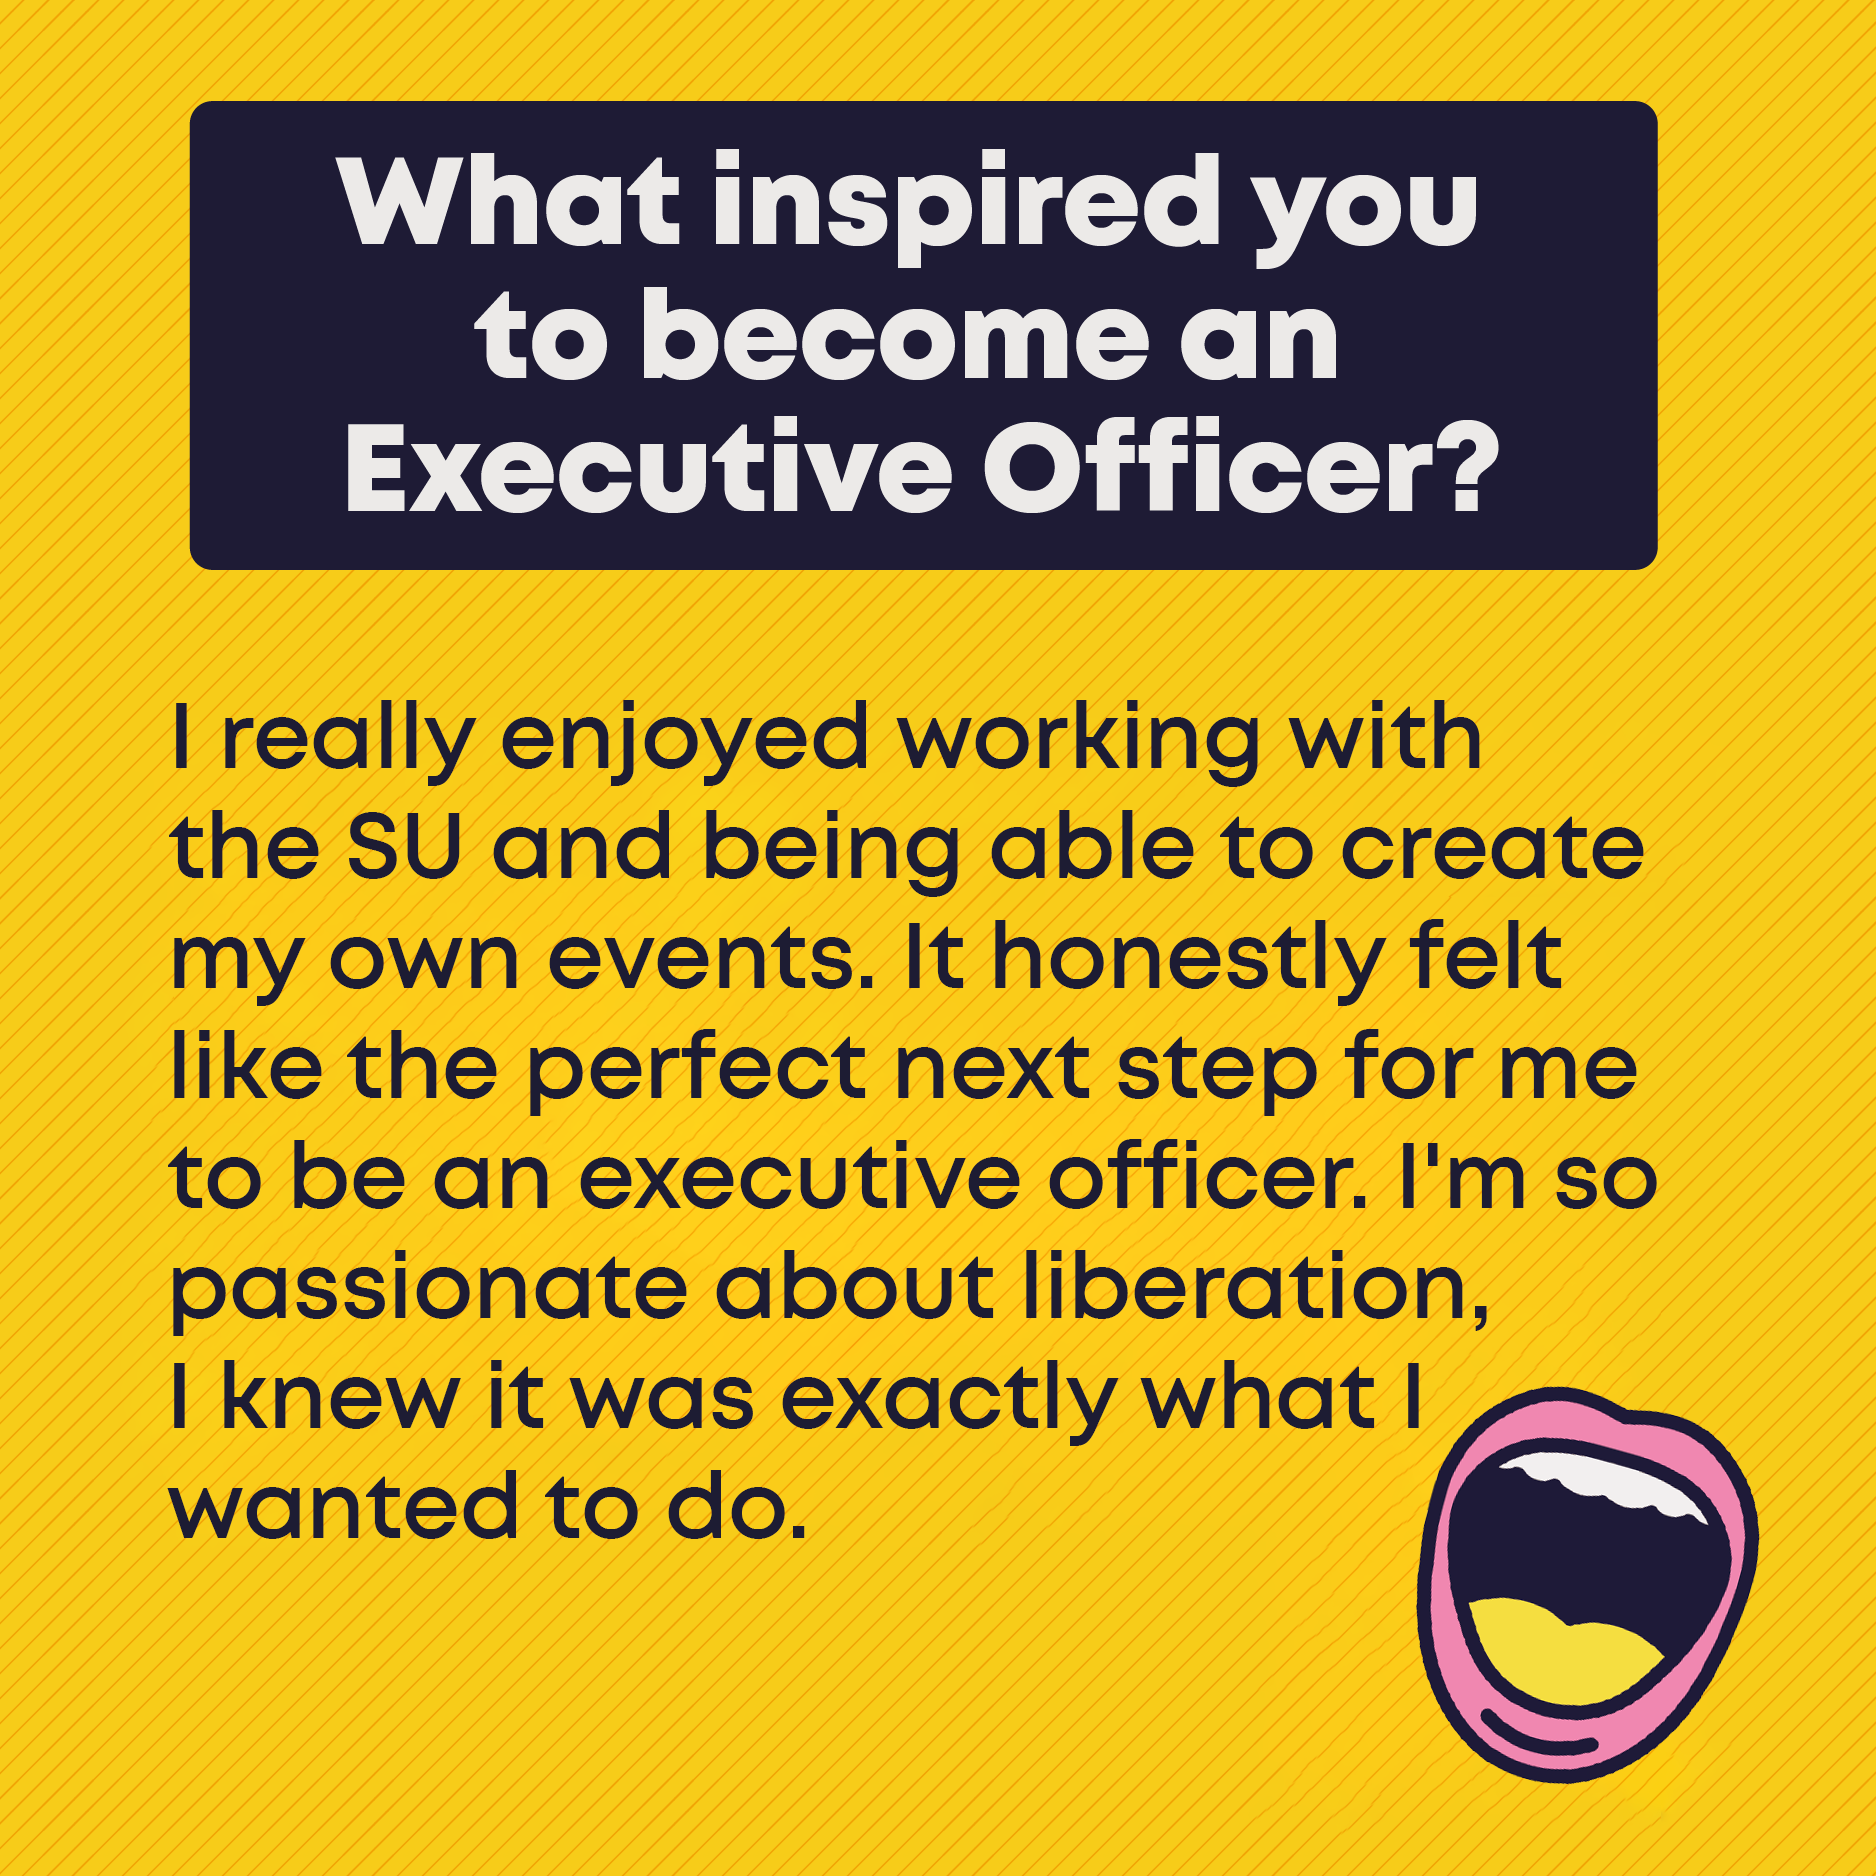 What inspired you to become an Executive Officer? I really enjoyed working with the SU and being able to create my own events. It honestly felt like the perfect next step for me to be an executive officer. I’m so passionate about liberation, I knew it was exactly what I wanted to do.